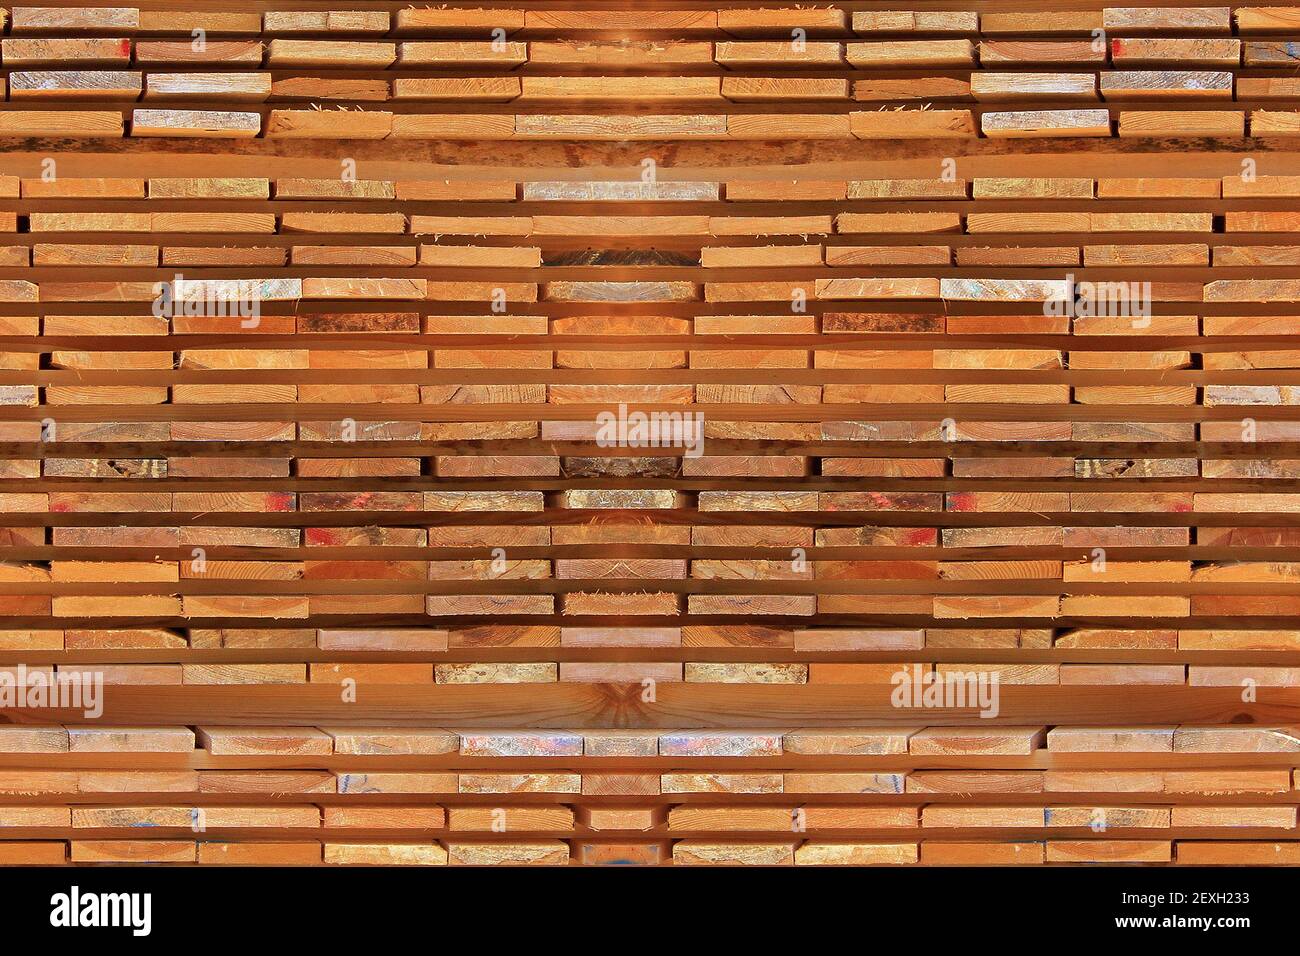 Wood boards Stock Photo